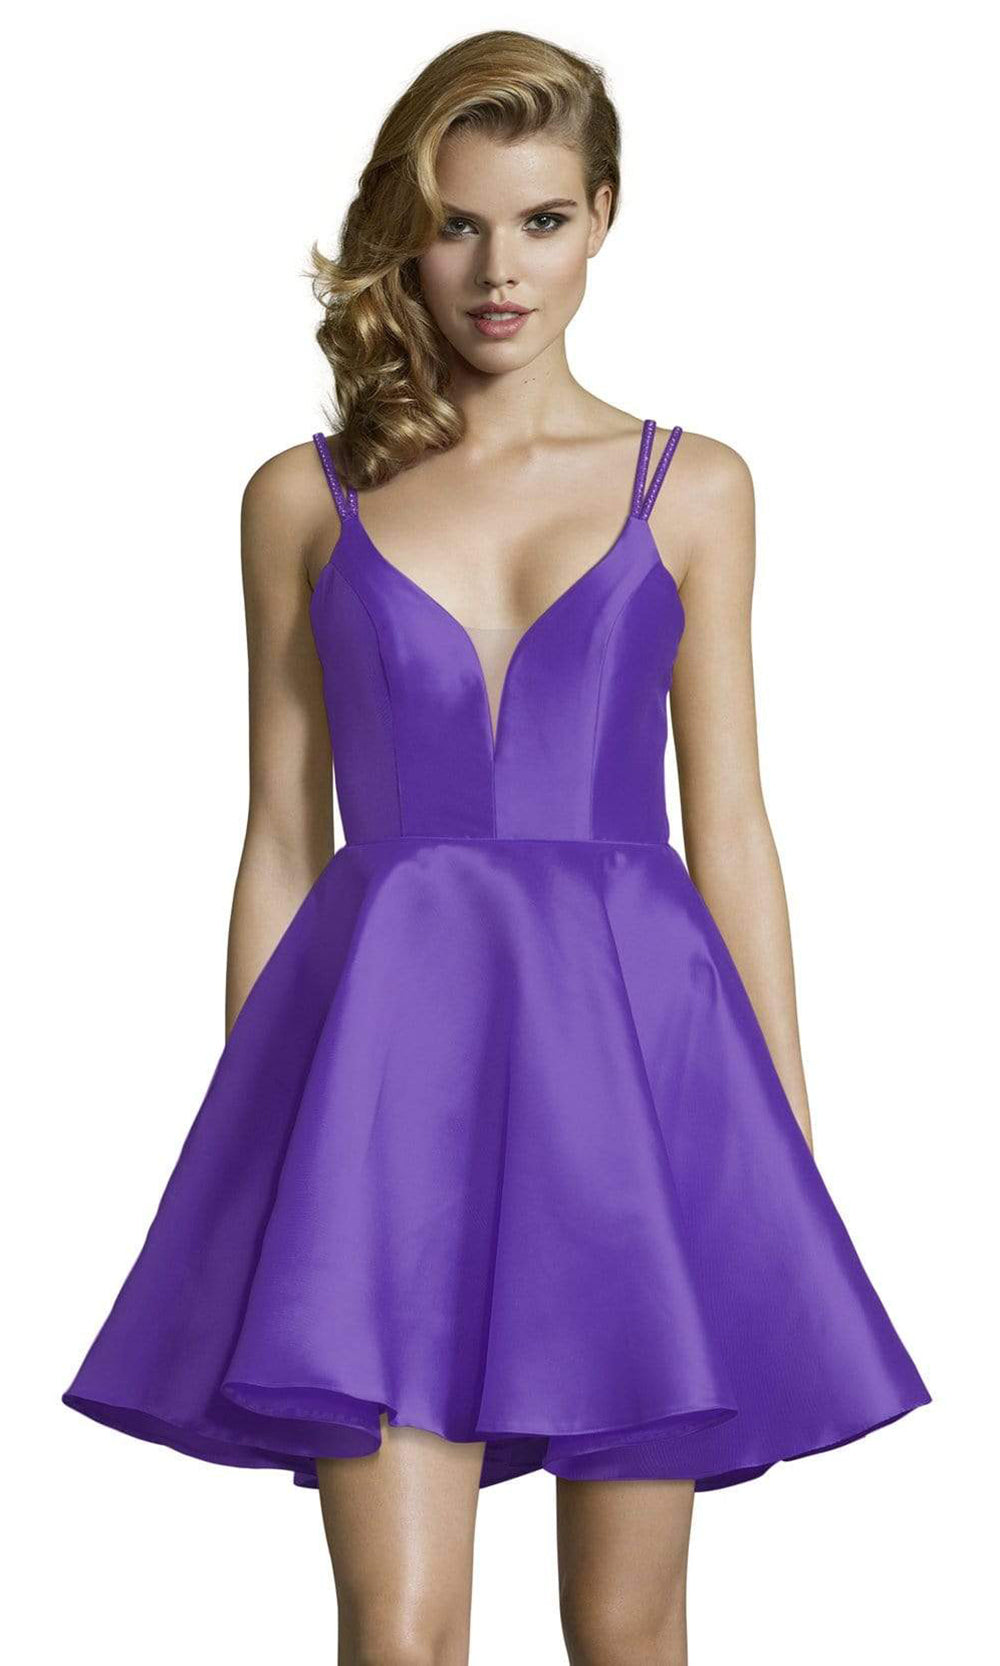 Alyce Paris Beaded Straps Fit and Flare Cocktail Dress 3769 - 1 pc Diamond White In Size 6 Available CCSALE 6 / Purple